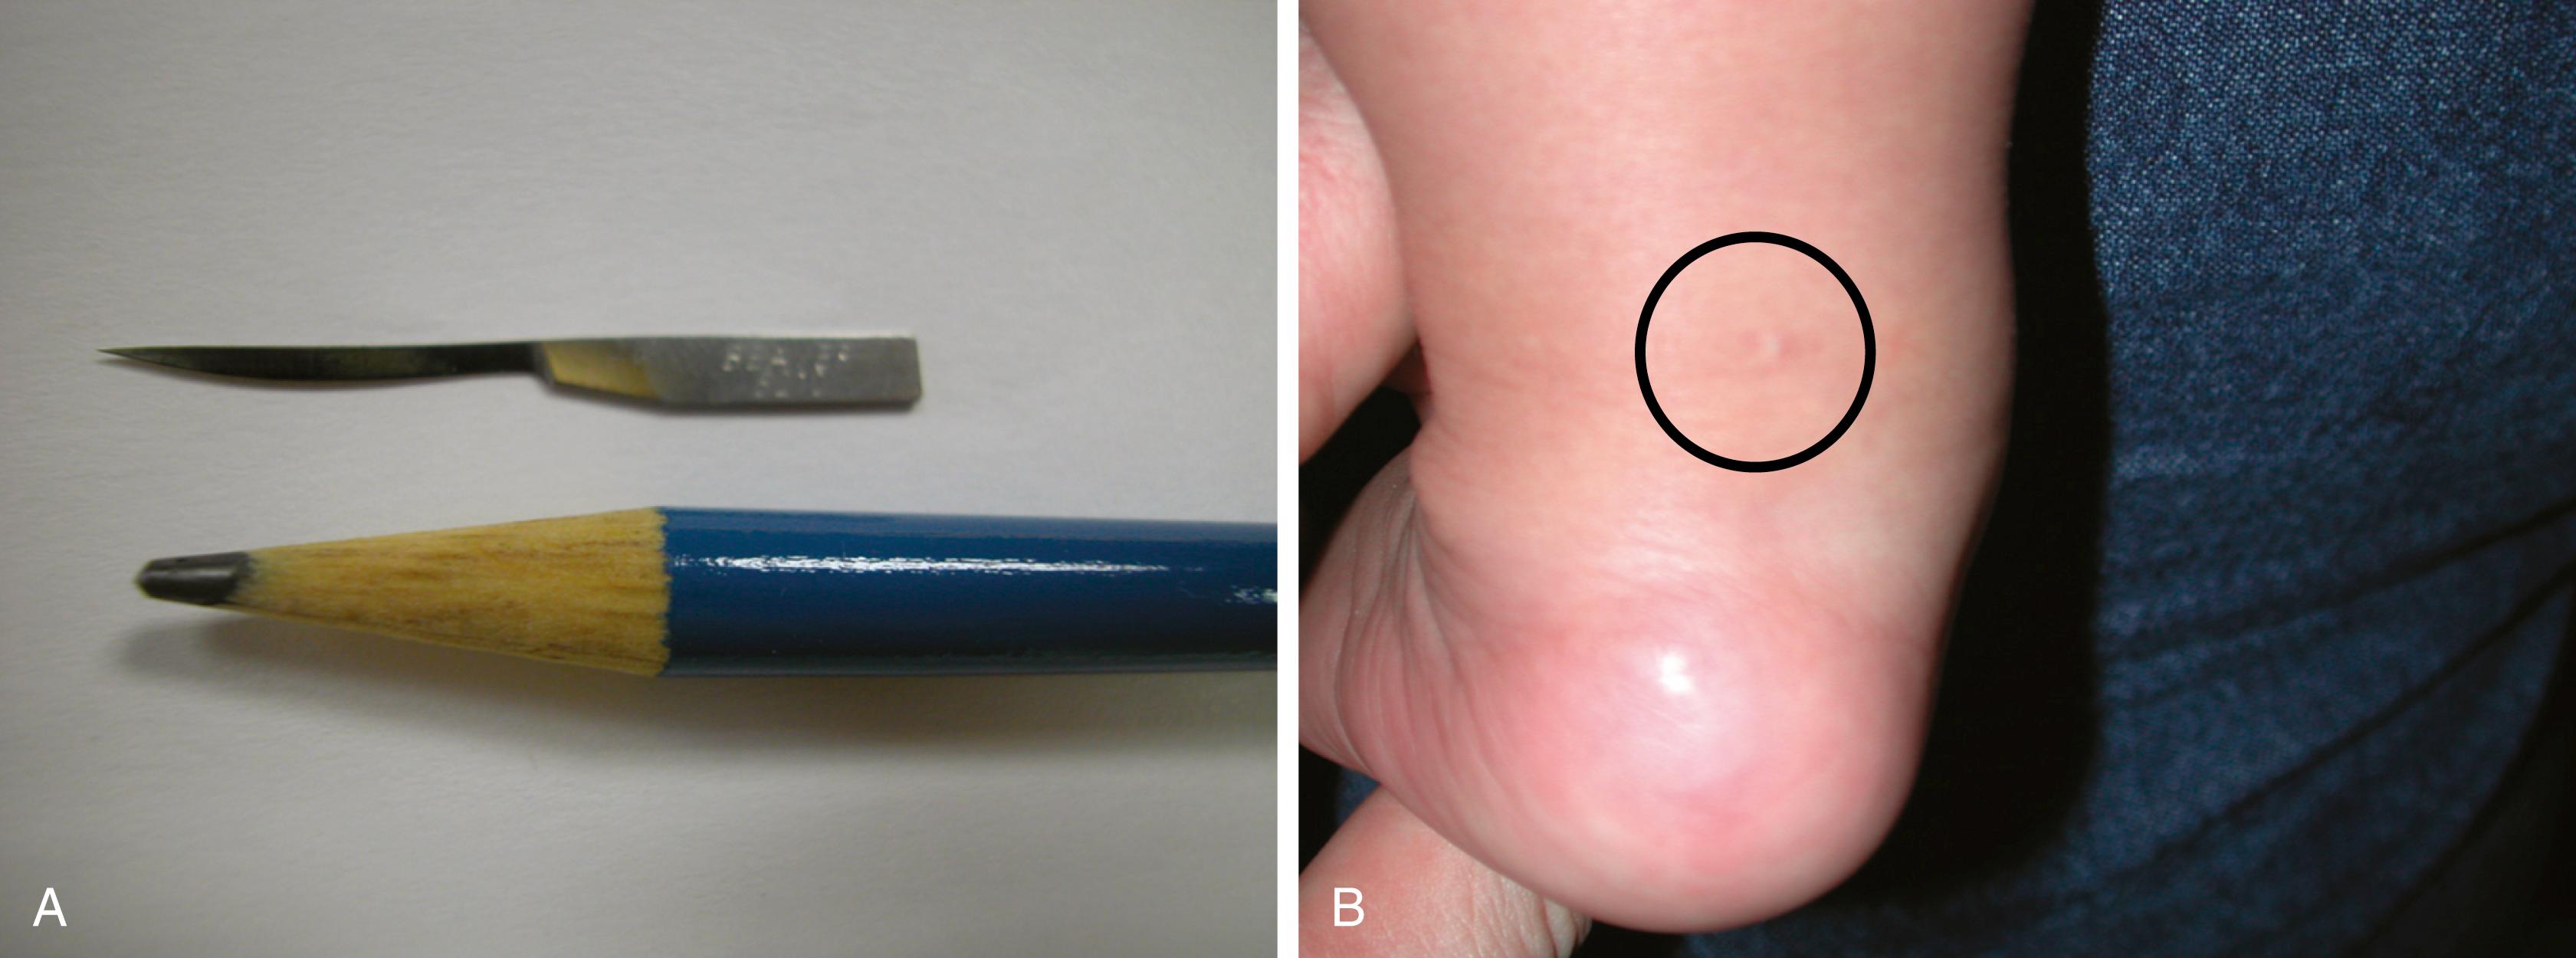 FIG. 19.46, (A) Thin cataract knife blade used for percutaneous heel cord tenotomy. (B) Little scarring is left.